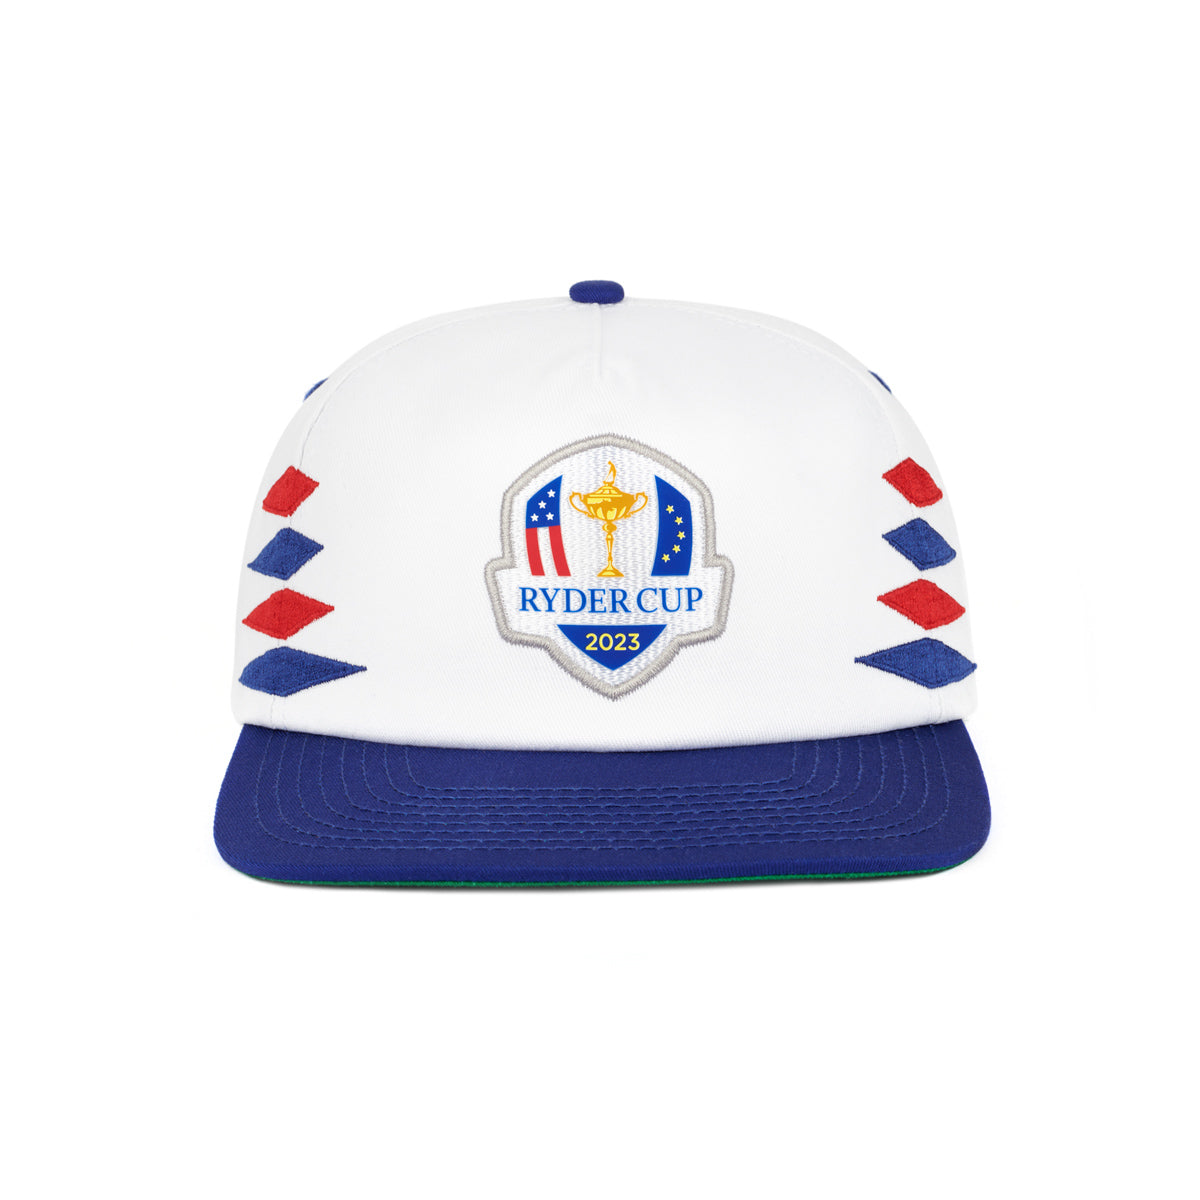 Barstool Golf x Ryder Cup Diamond Retro Hat-Hats-Fore Play-White-One Size-Barstool Sports